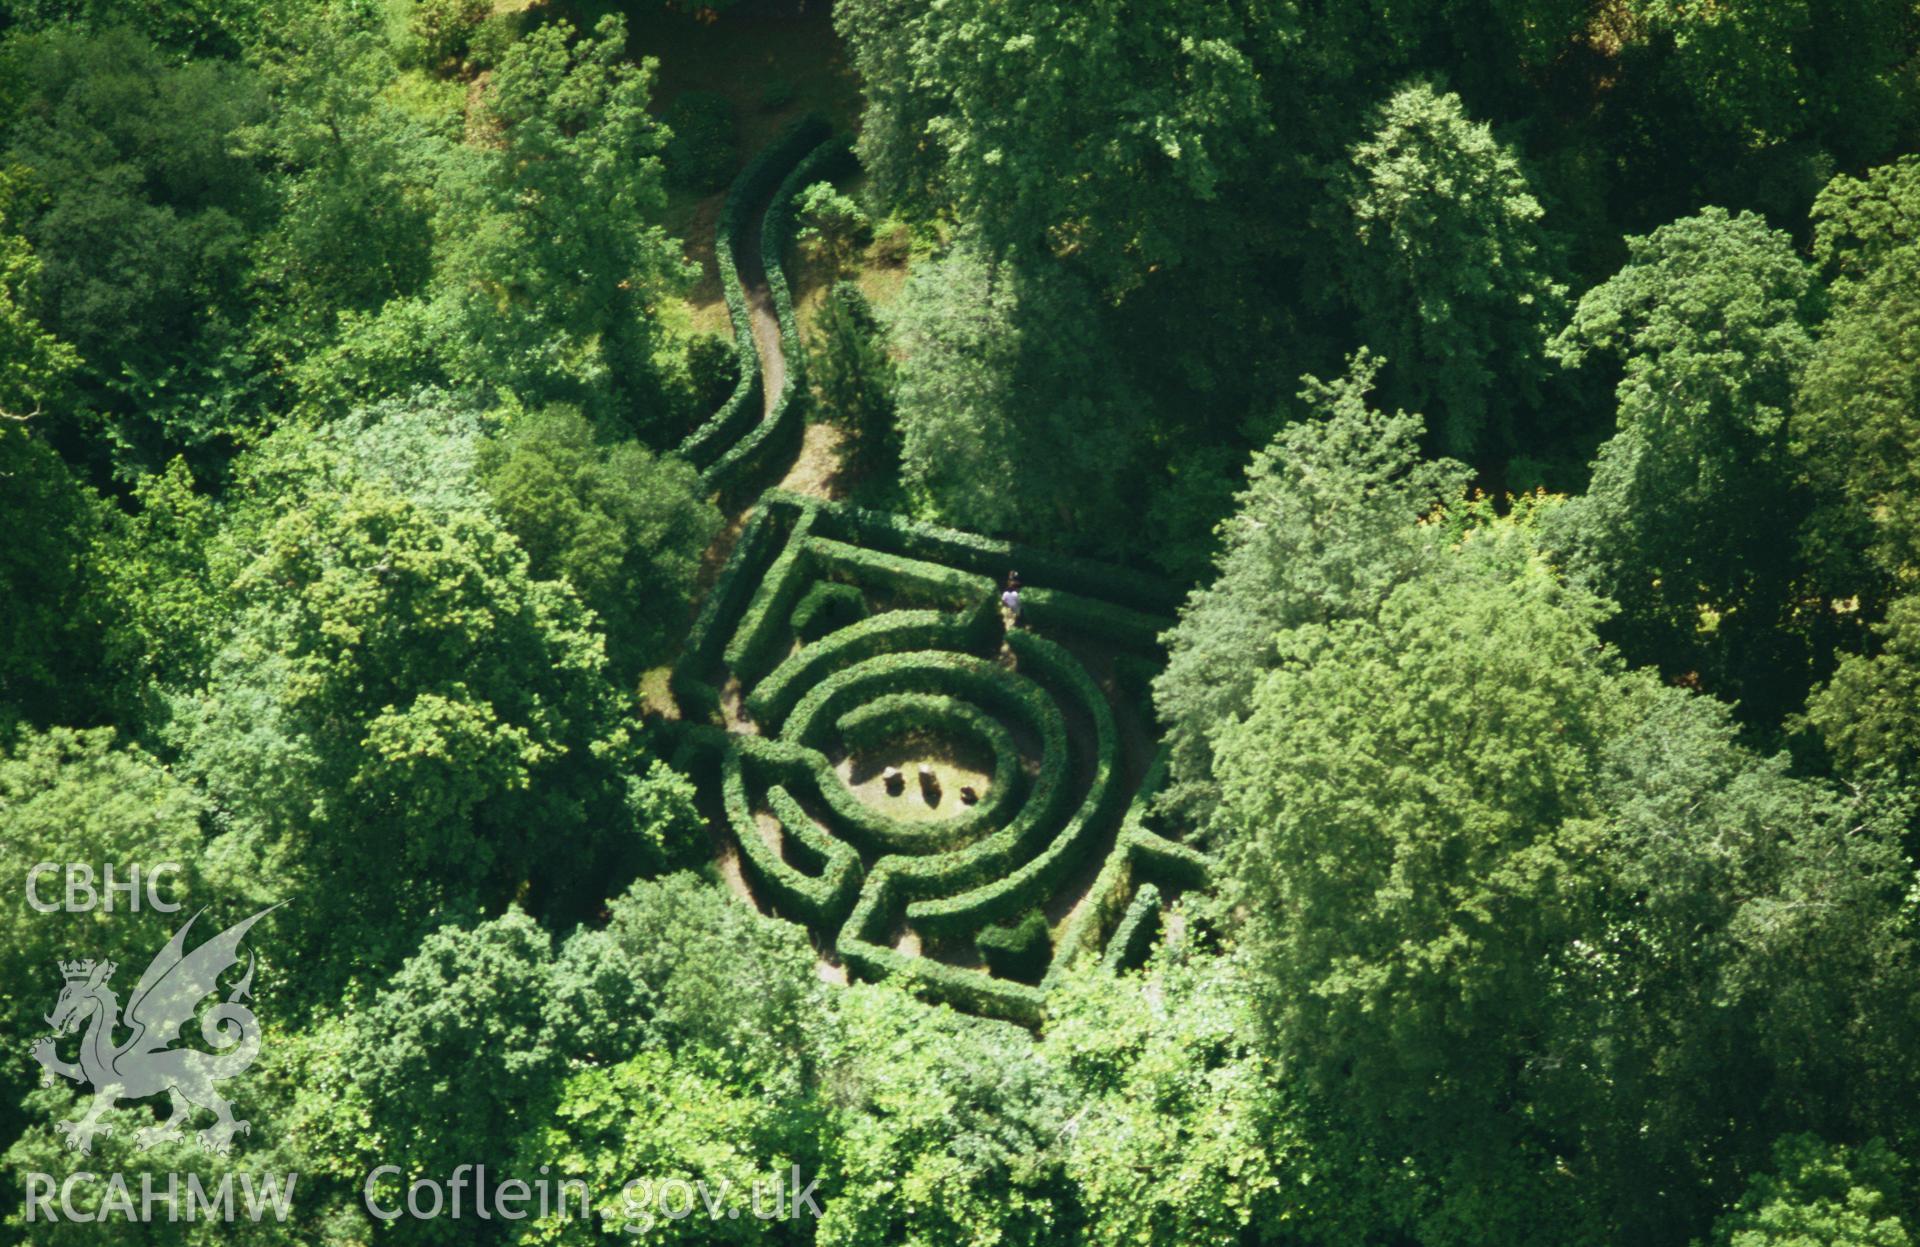 Slide of RCAHMW colour oblique aerial photograph of the maze at Picton Castle, taken by Toby Driver, 2004.